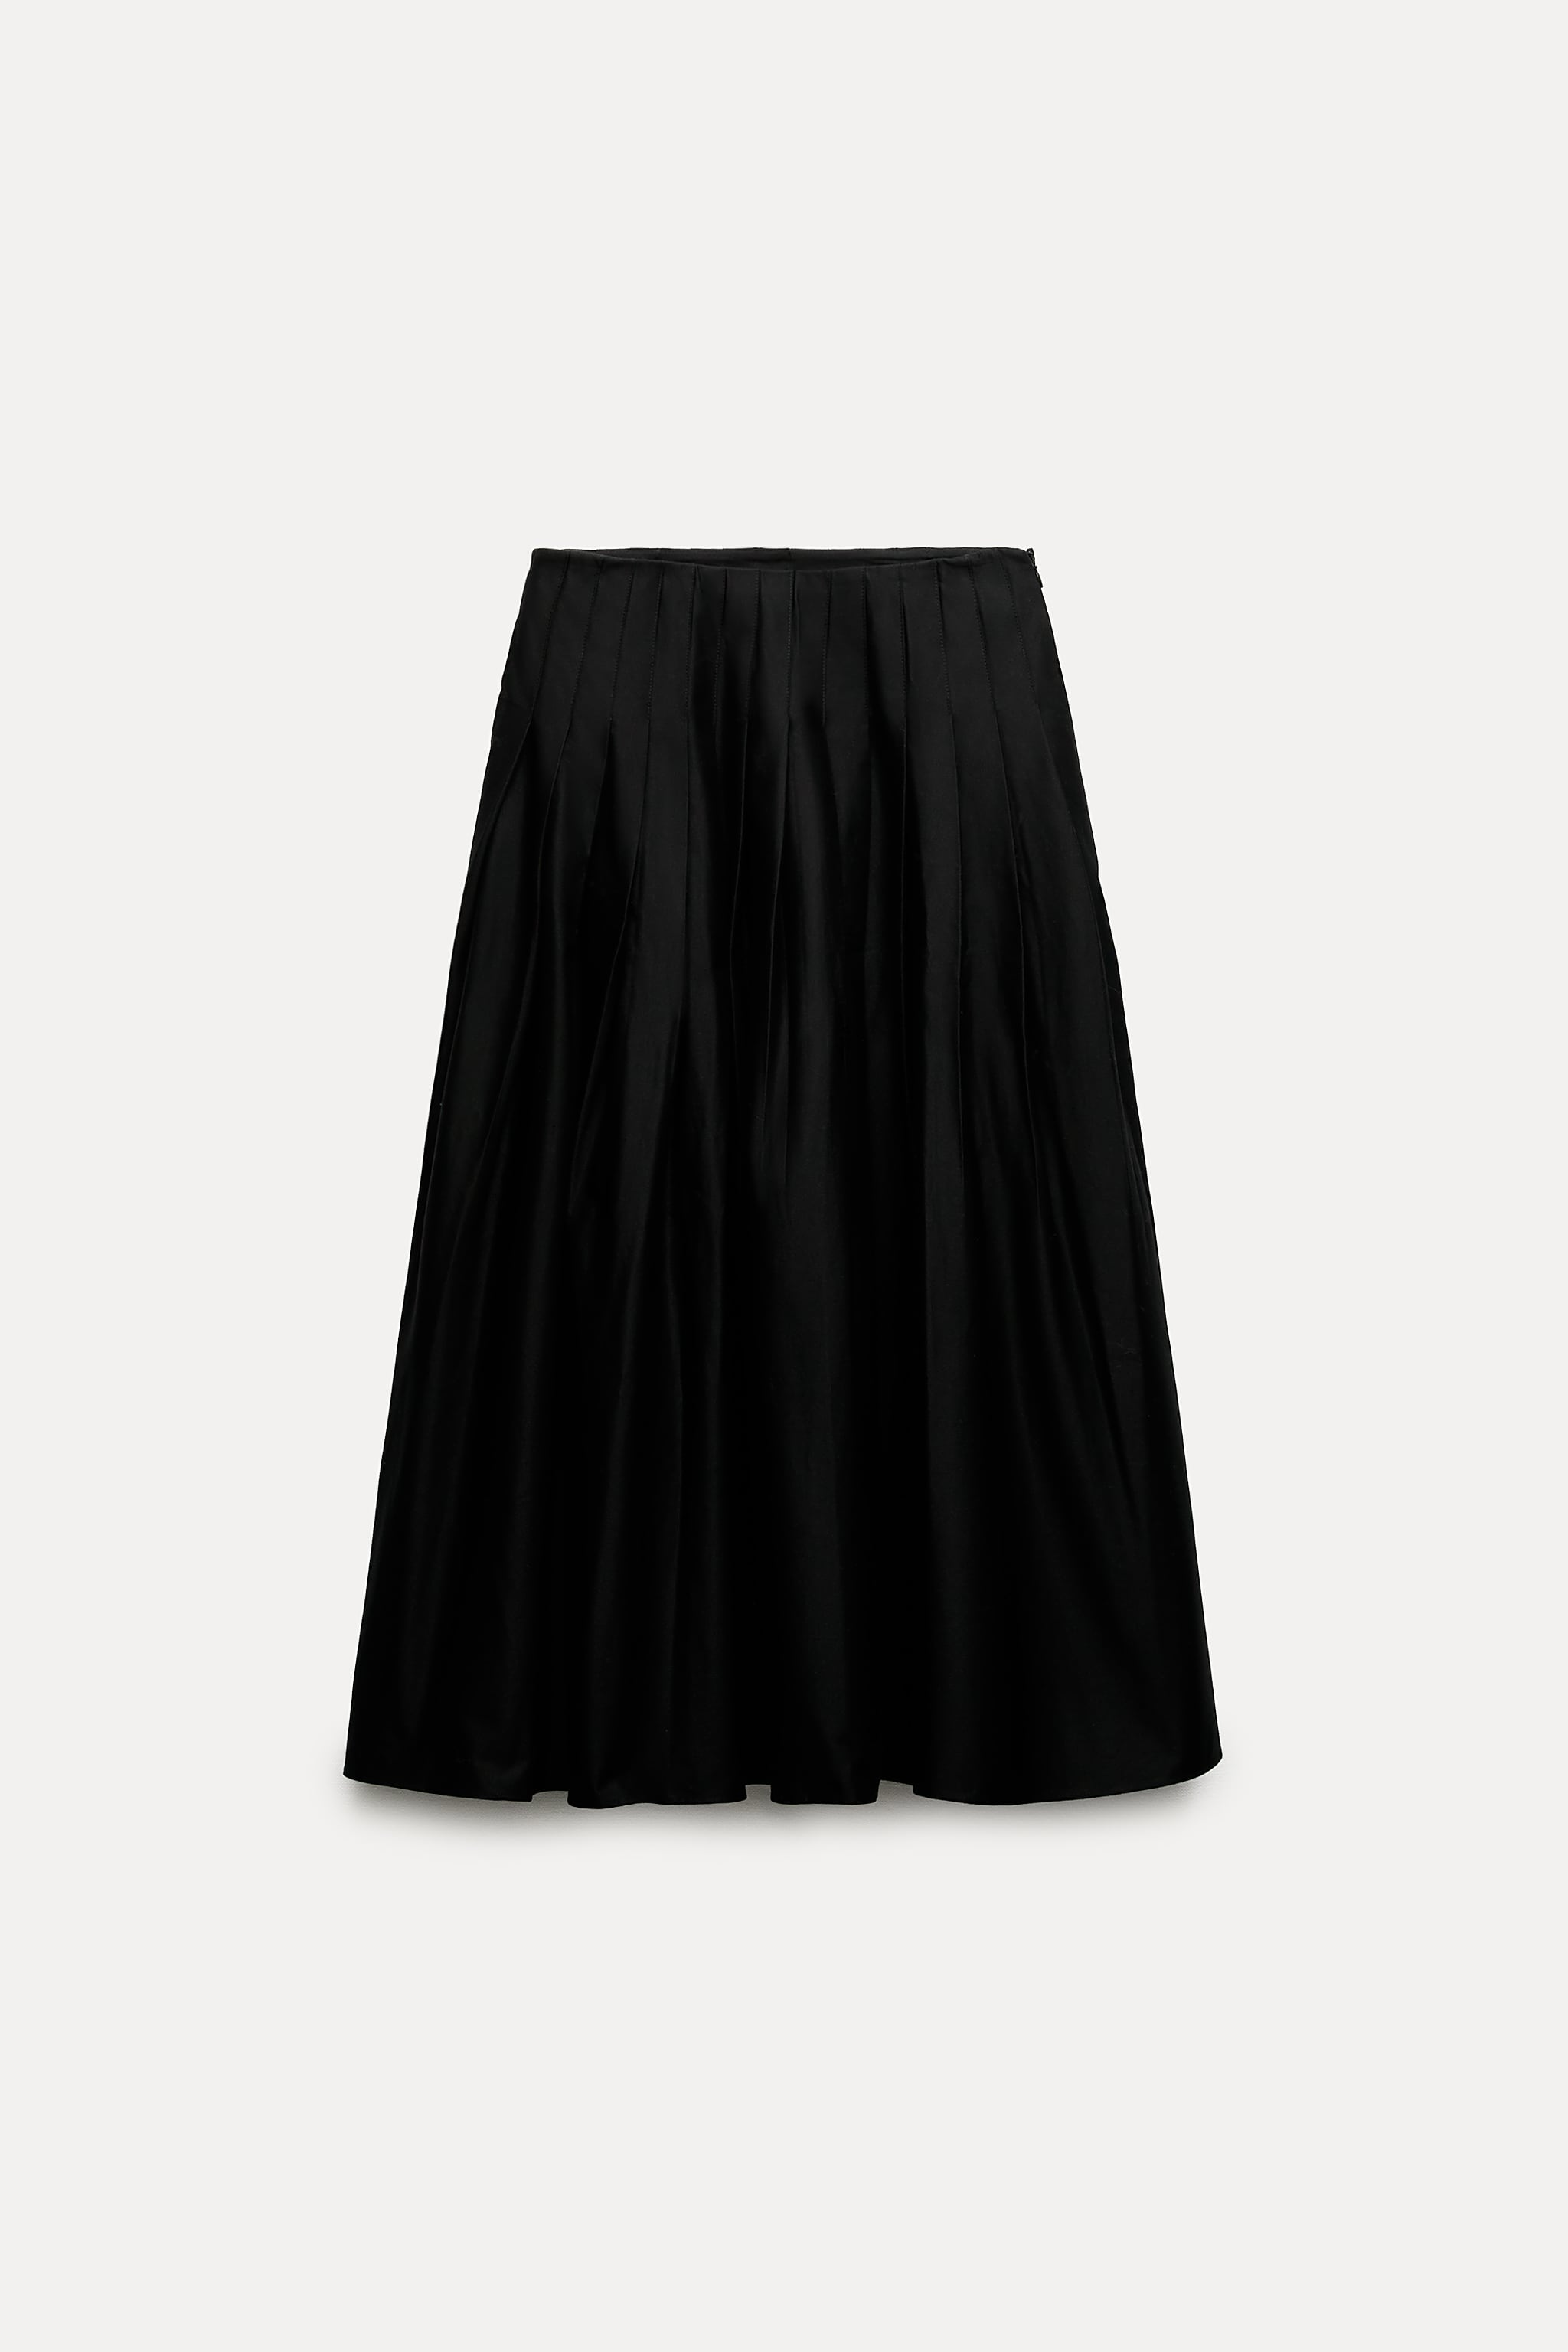 ZW COLLECTION PLEATED BOX PLEAT SKIRT